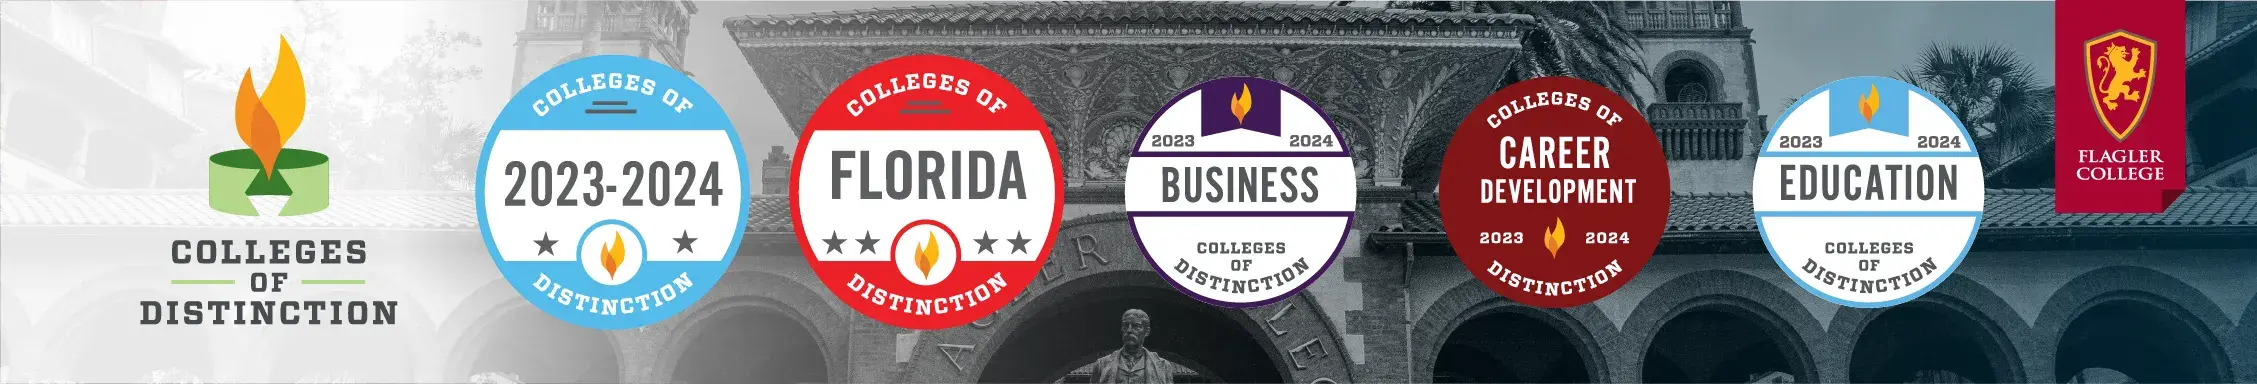 Logos for the 2023-2024 Colleges of Distinction